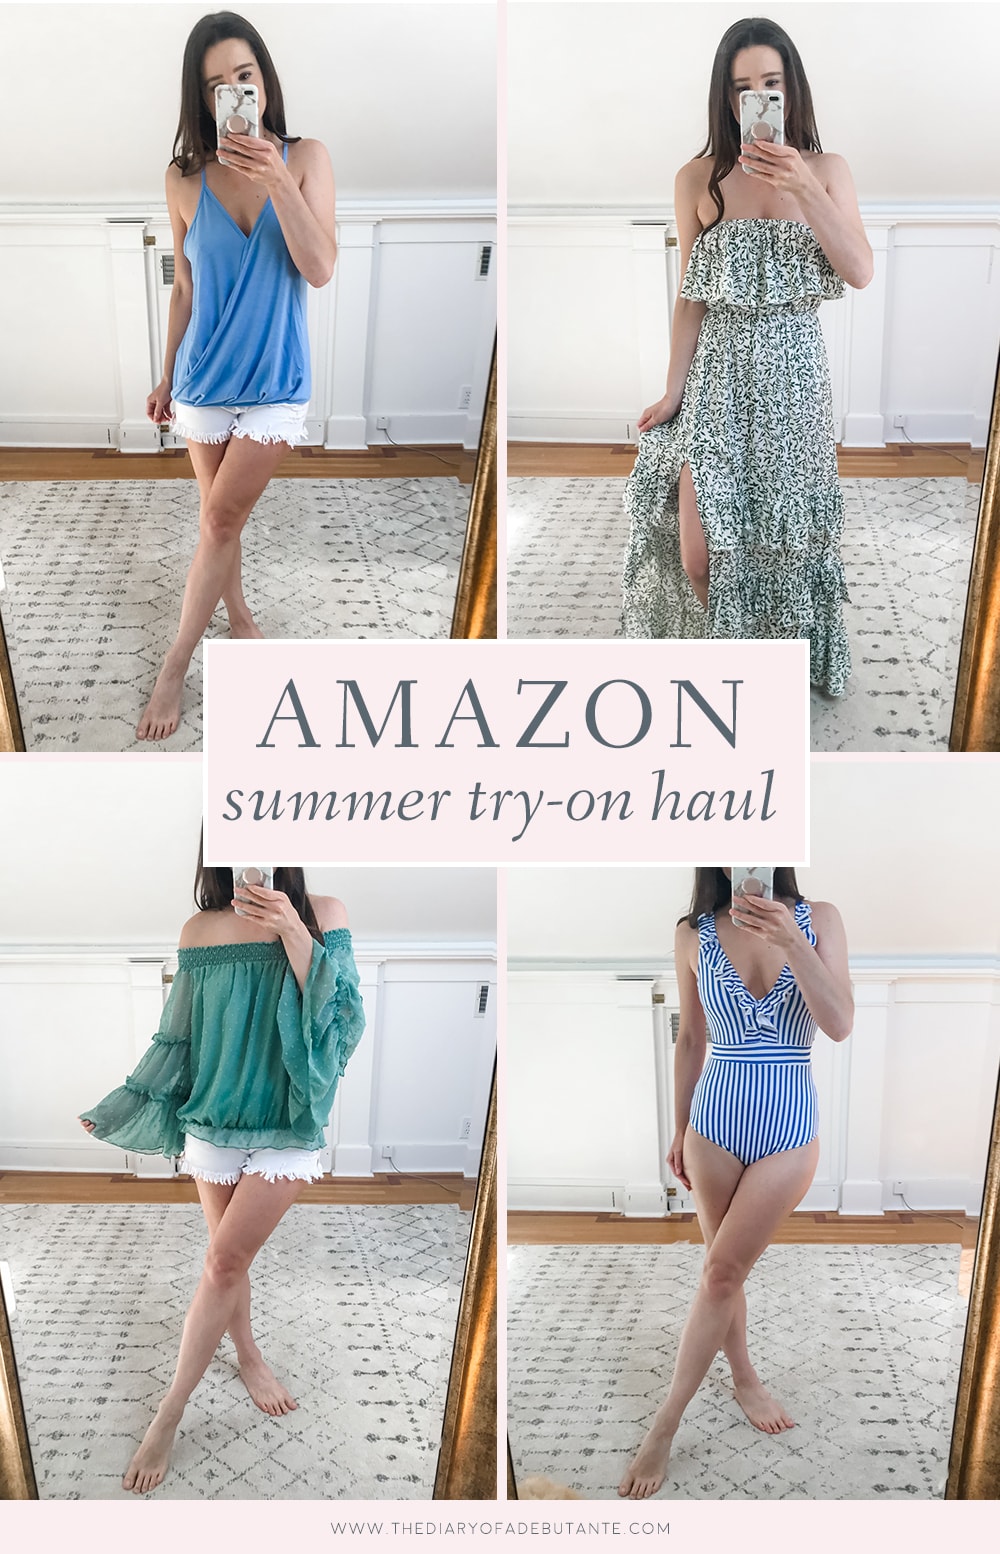 Amazon summer try on haul by affordable fashion blogger Stephanie Ziajka on Diary of a Debutante